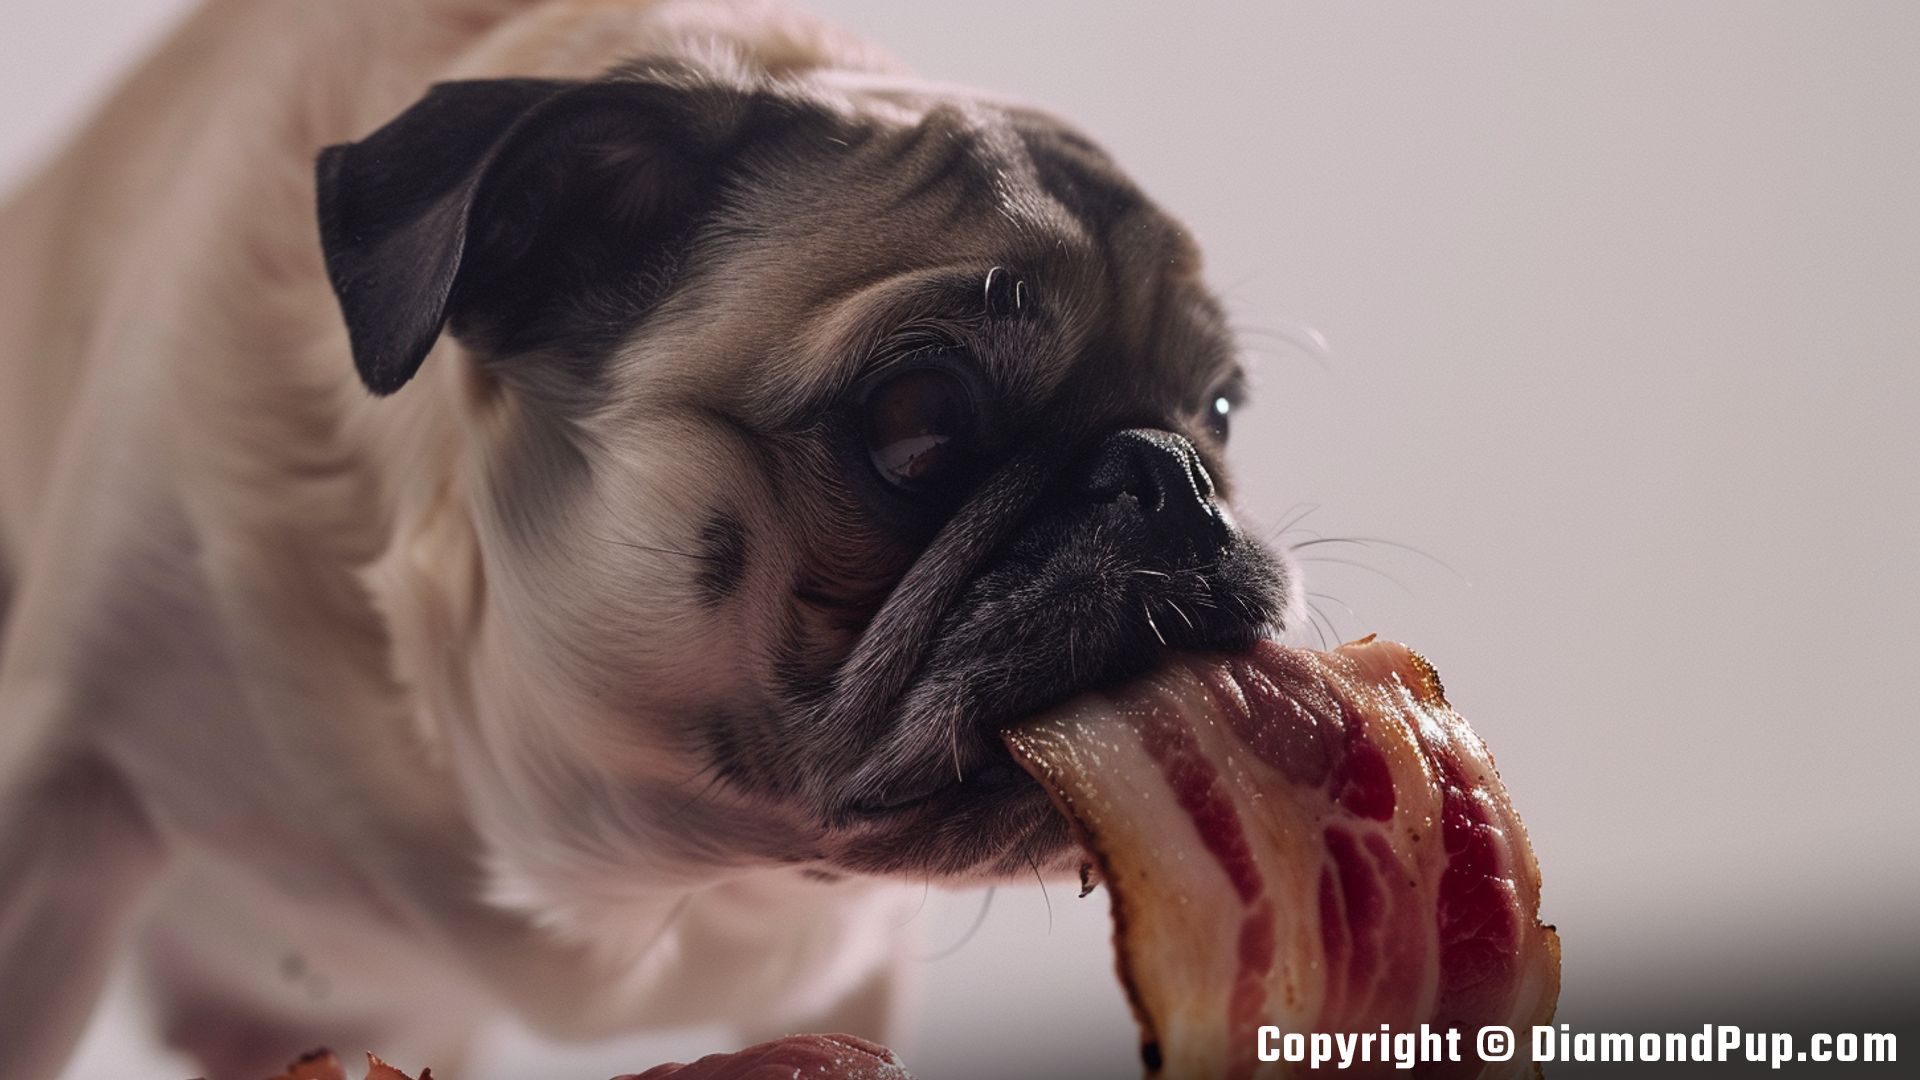 Image of a Cute Pug Eating Bacon